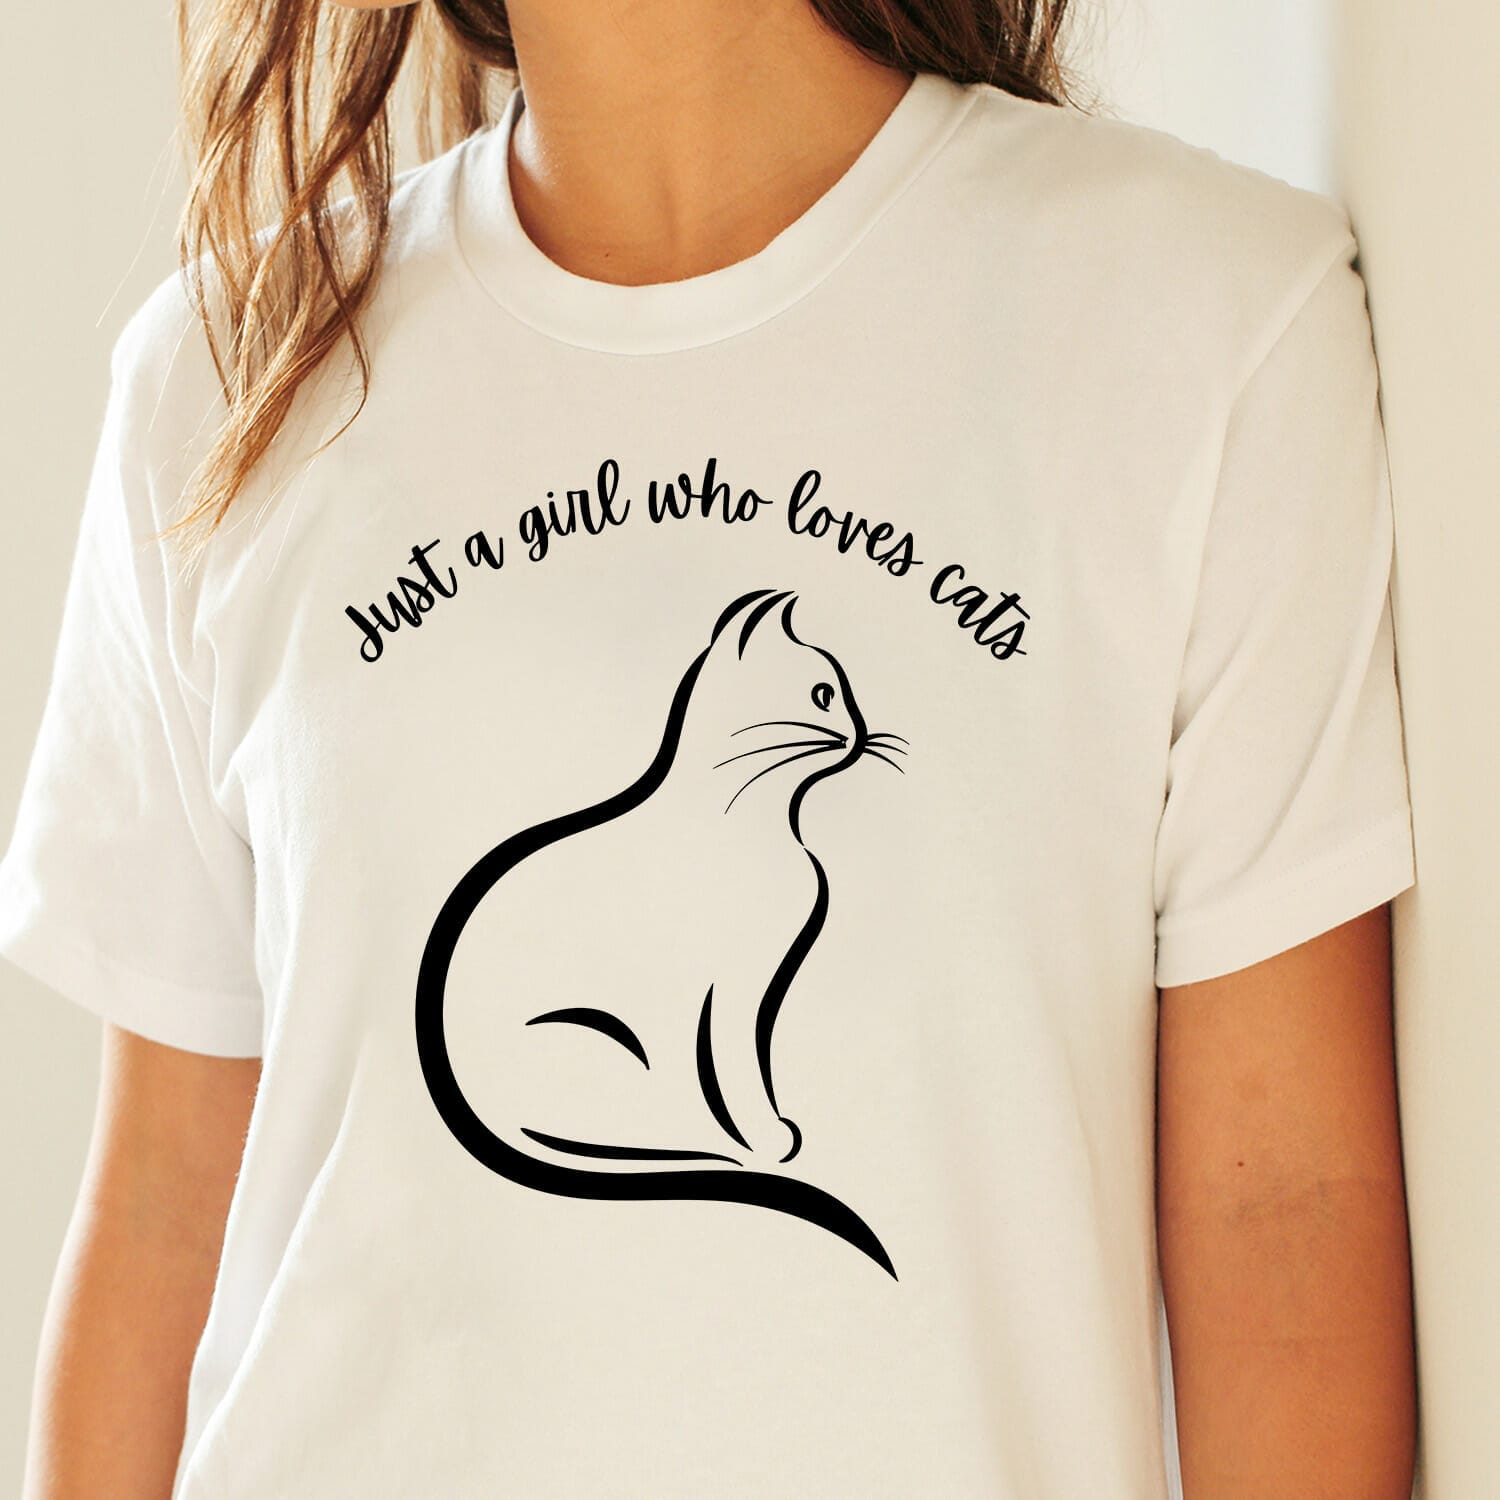 Just a girl who loves Cats T-shirt design